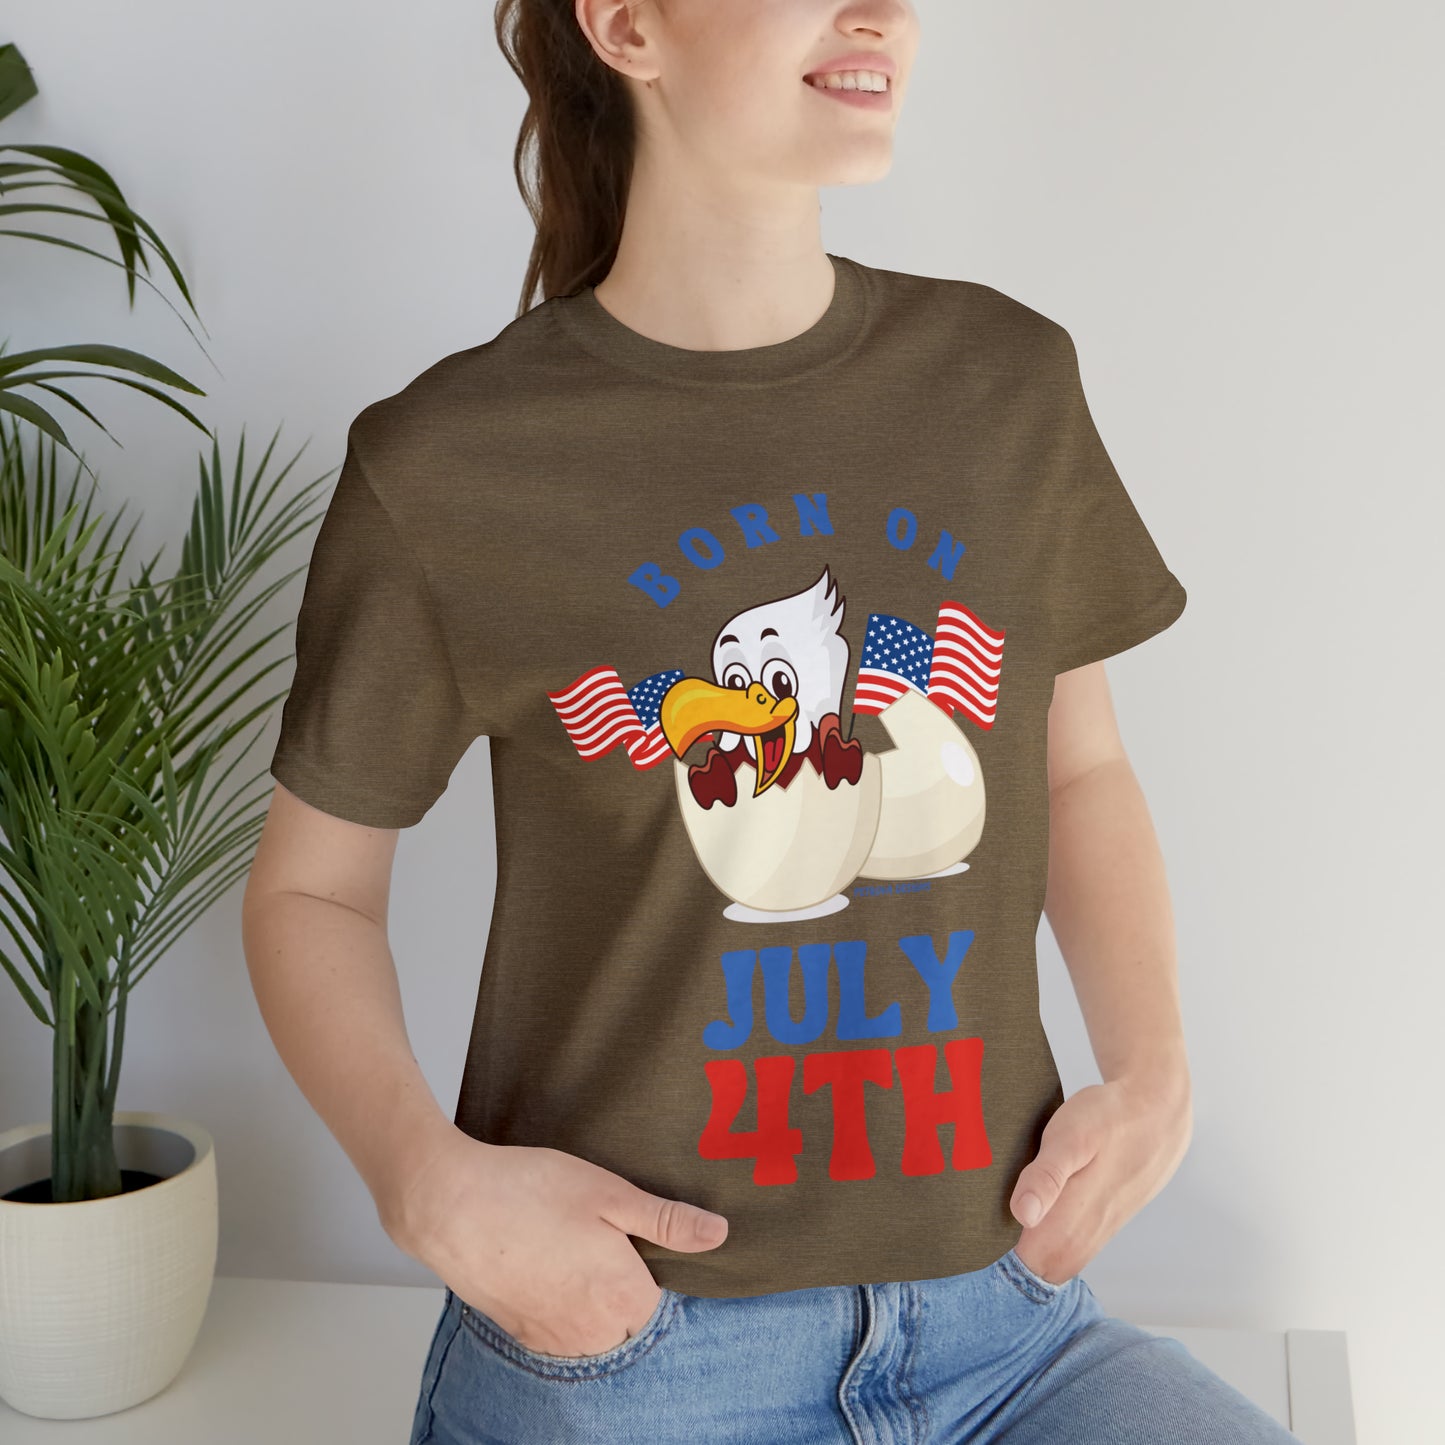 Heather Olive T-Shirt Tshirt Design Gift for Friend and Family Short Sleeved Shirt 4th of July Independence Day Petrova Designs